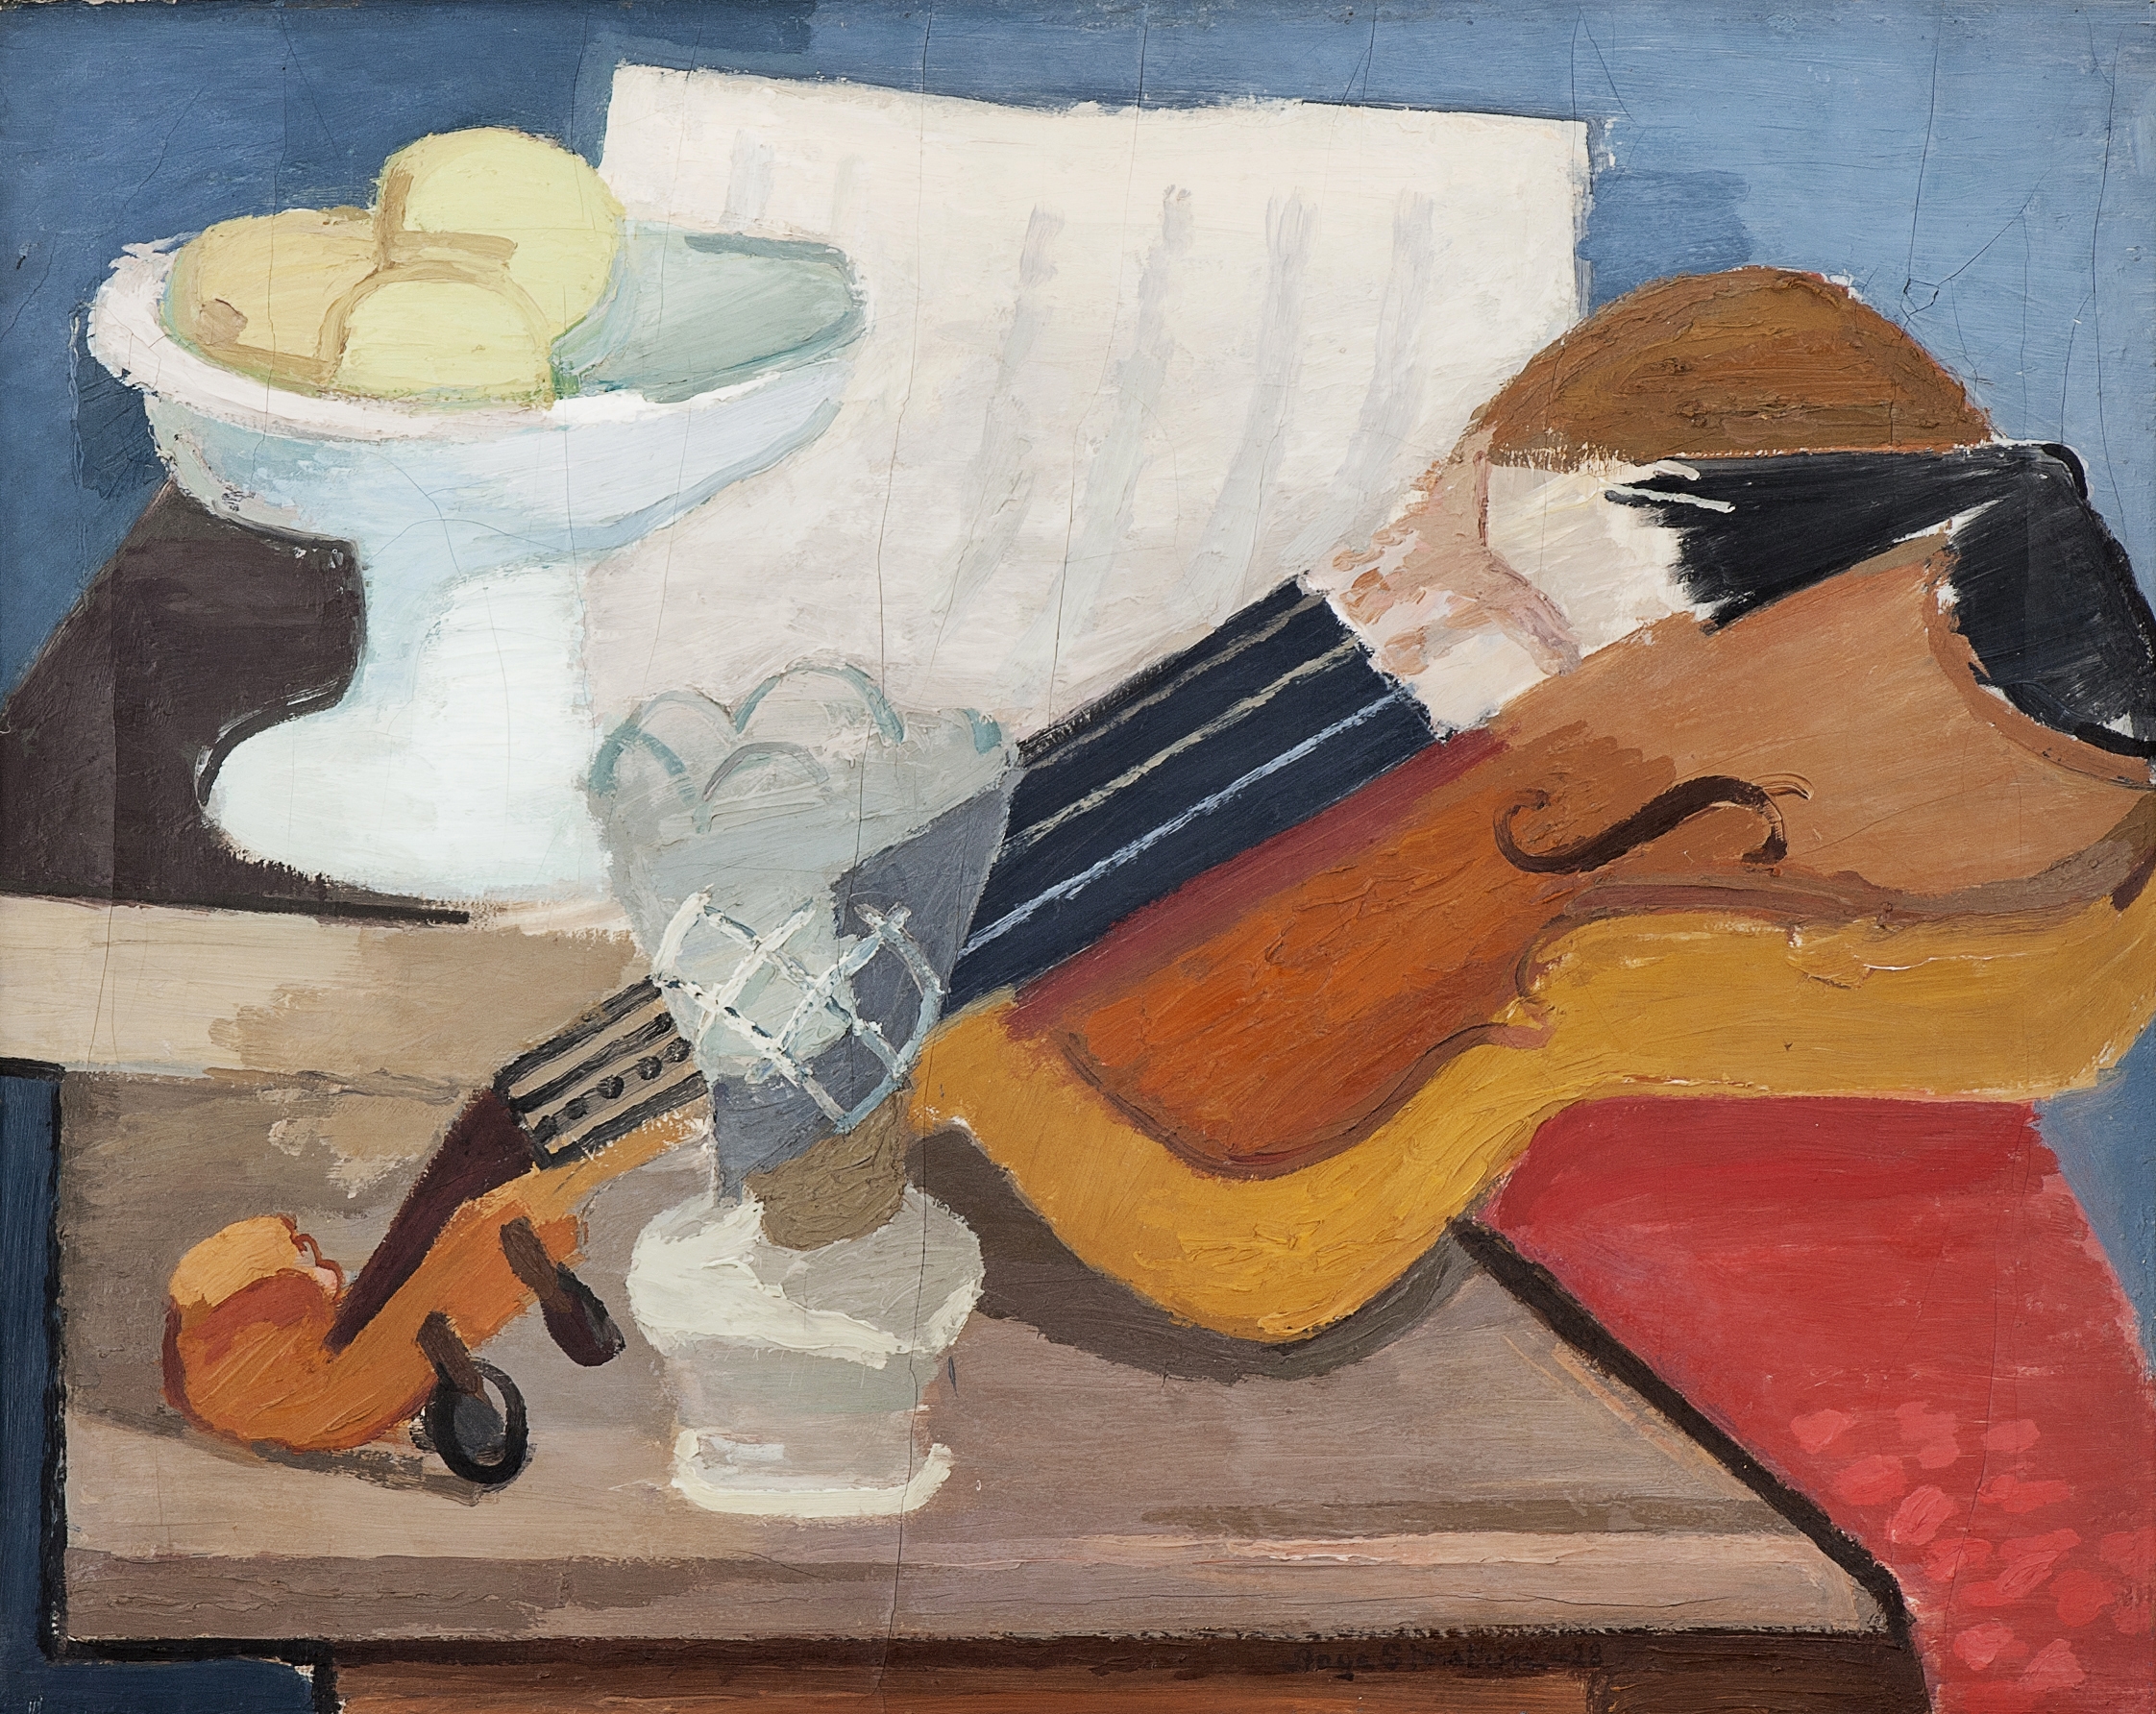 Still Life with a Violin by Aage Storstein, 1928